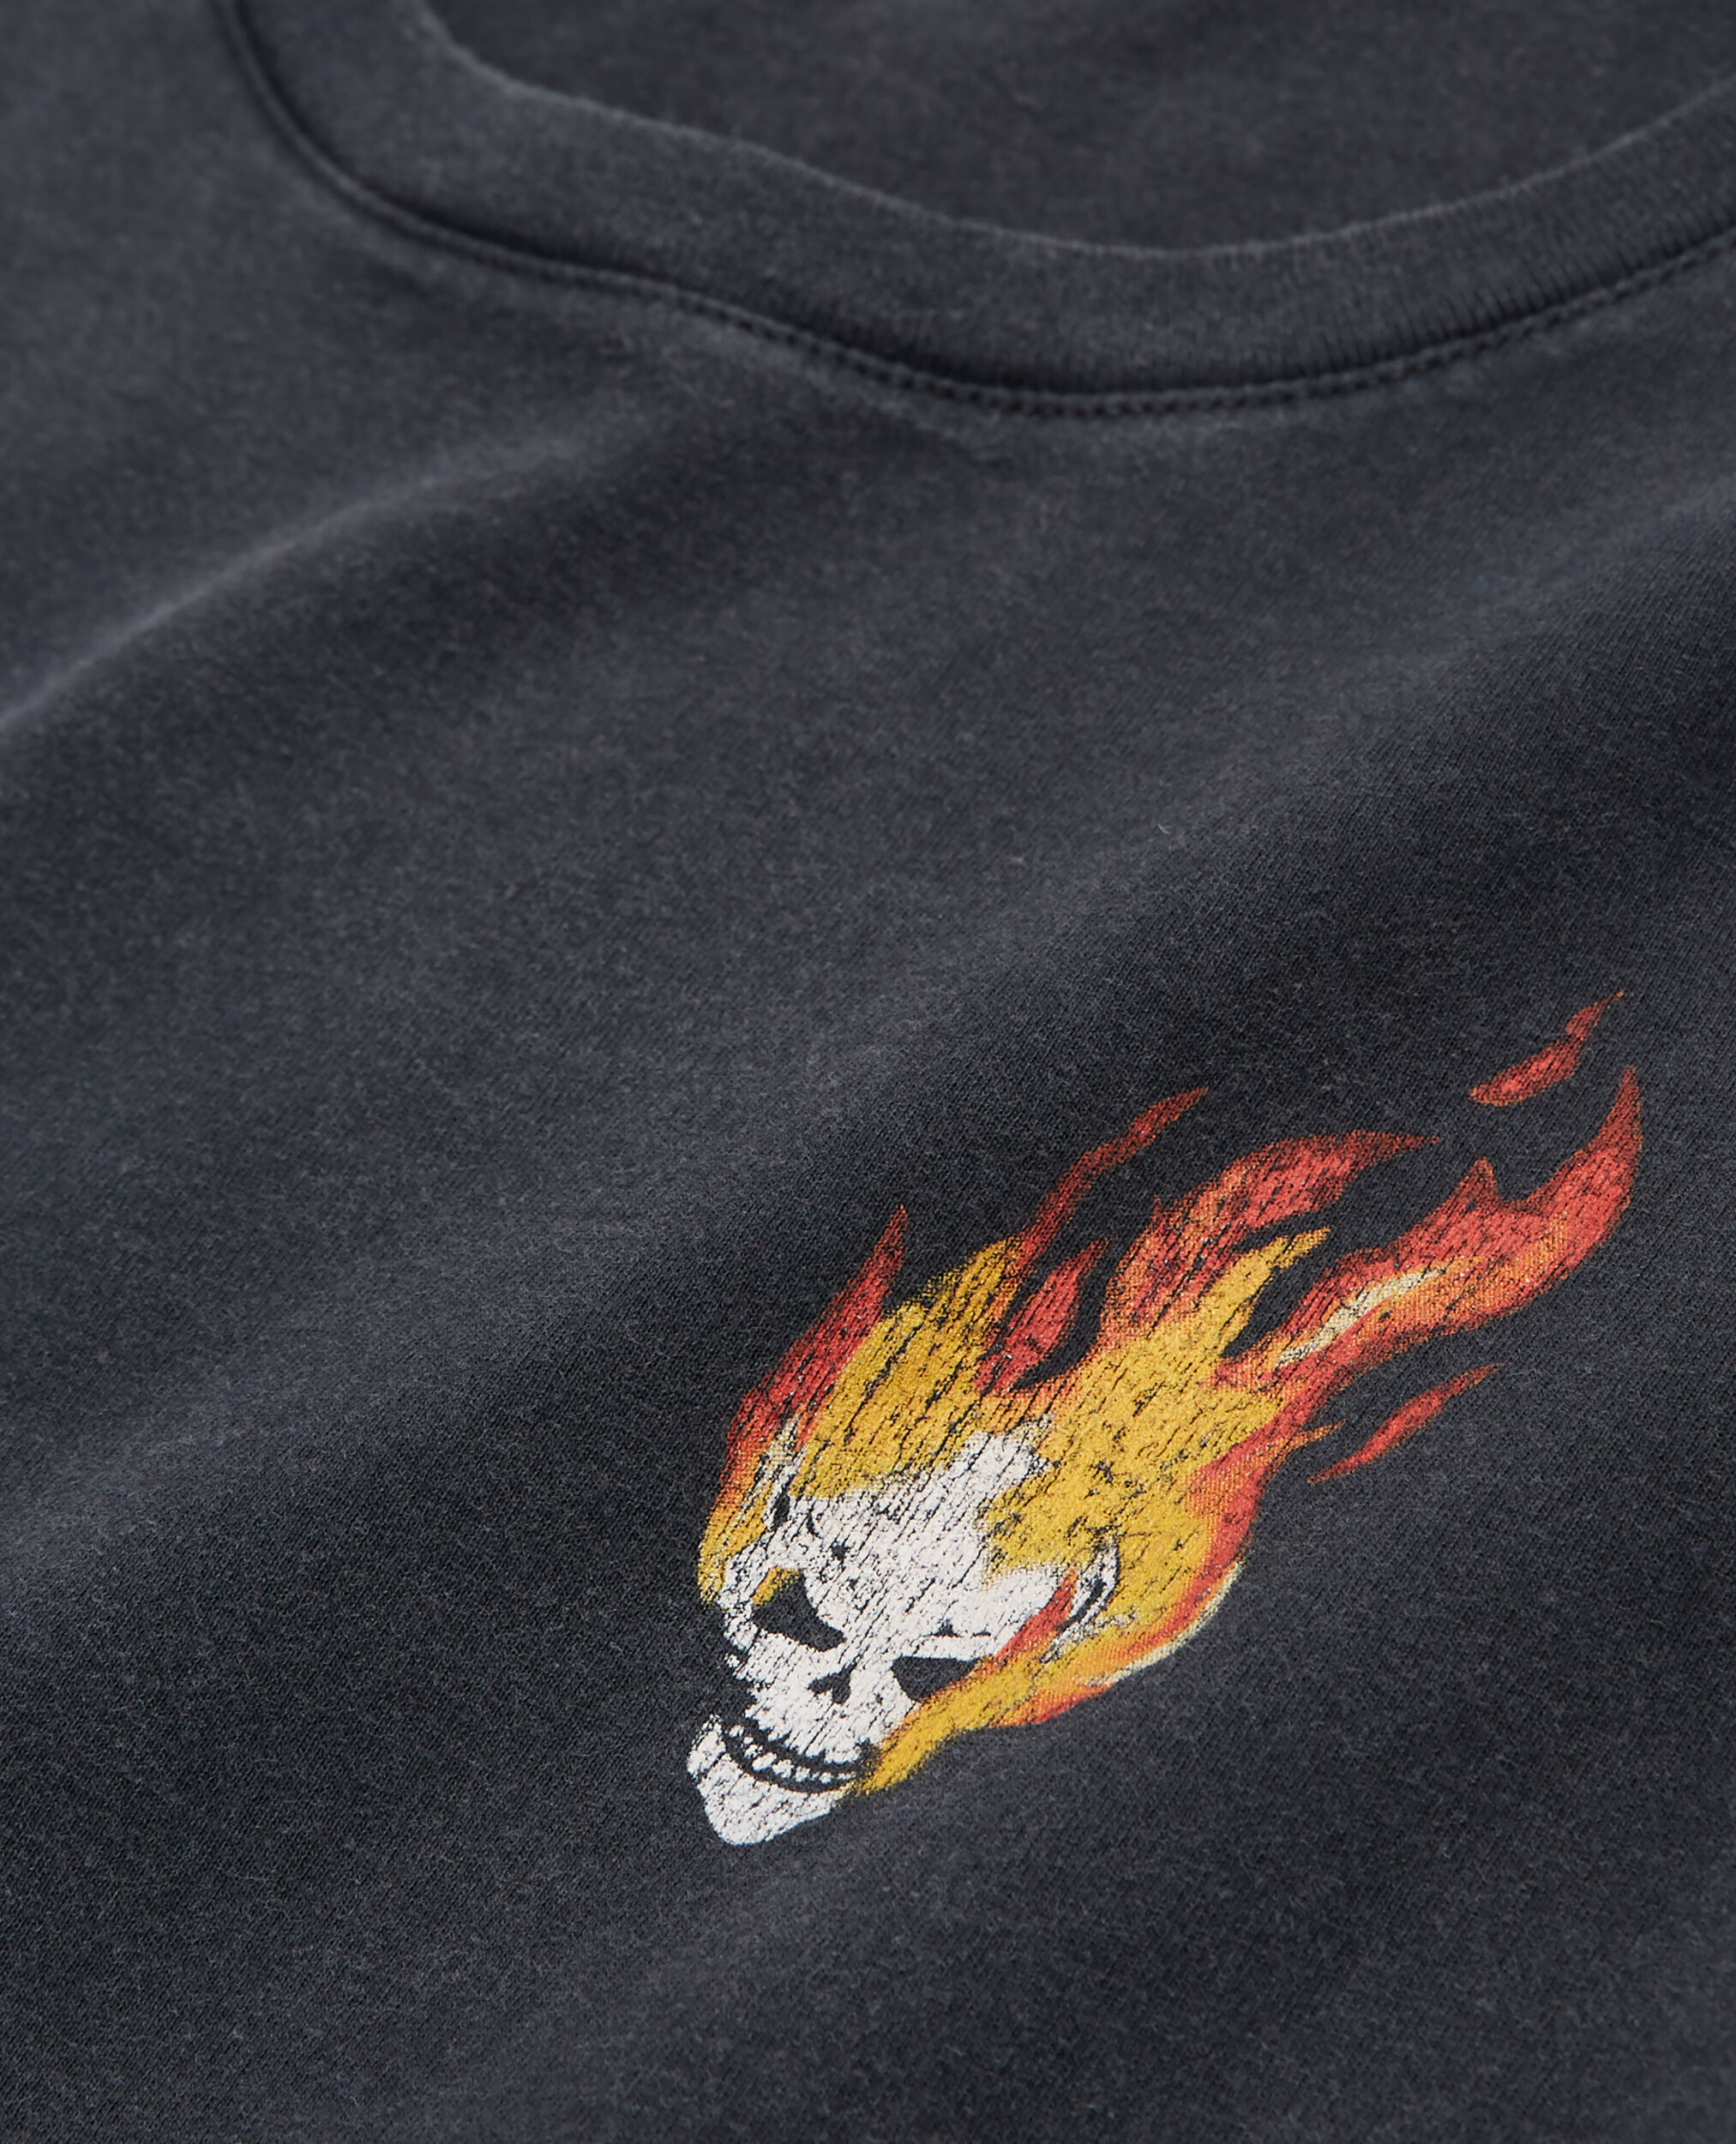 Black T-shirt with Skull on fire print, BLACK WASHED, hi-res image number null